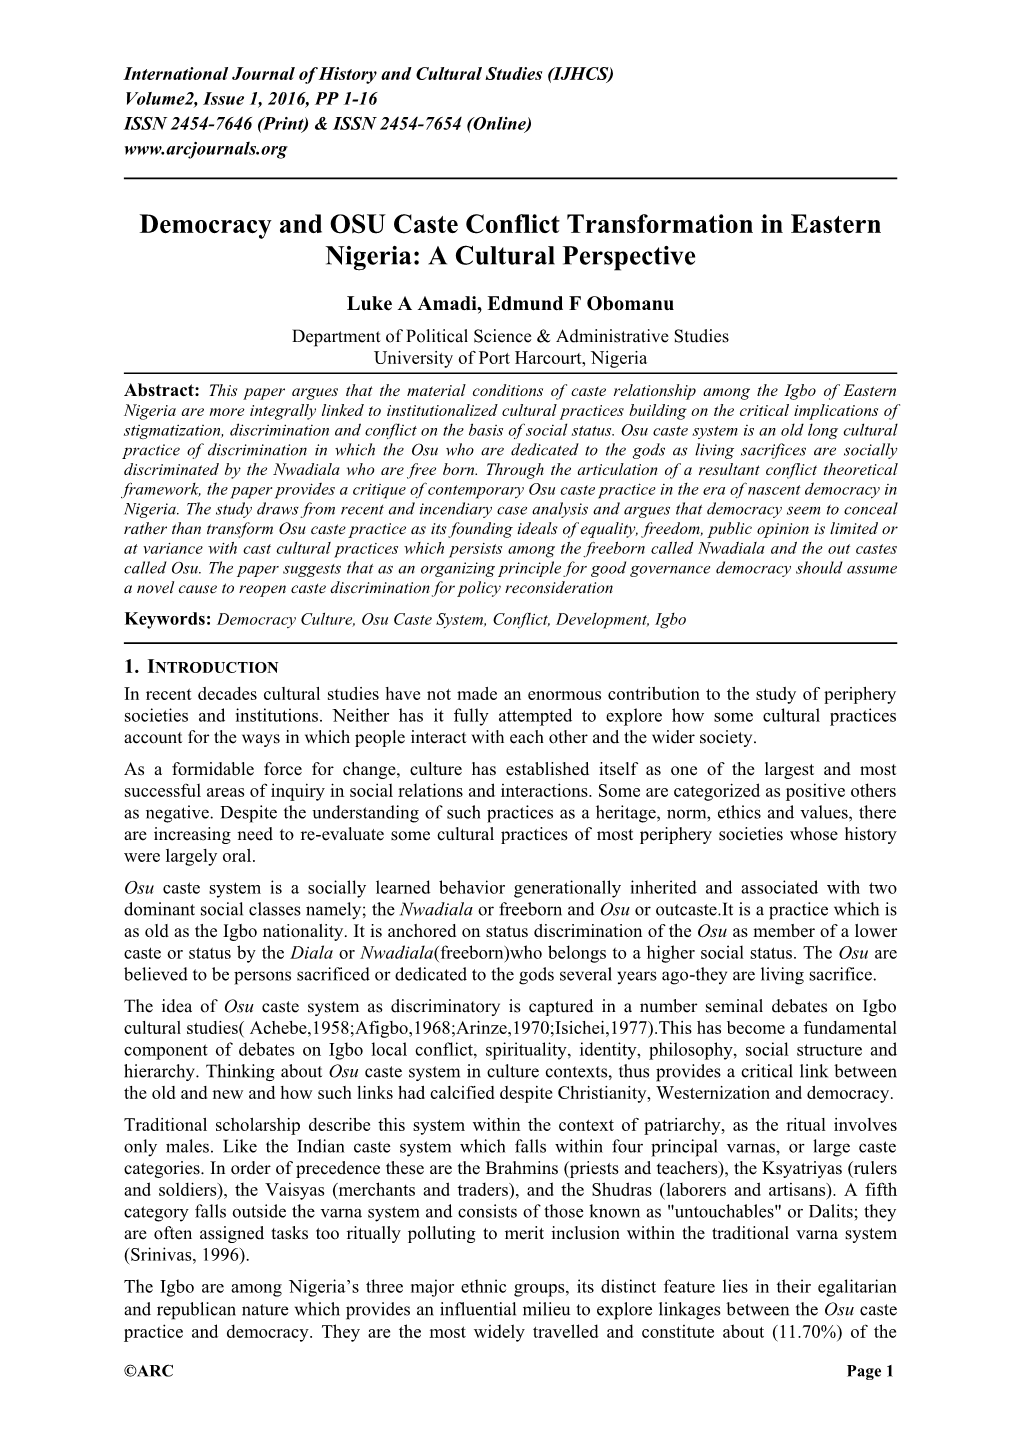 Democracy and OSU Caste Conflict Transformation in Eastern Nigeria: a Cultural Perspective